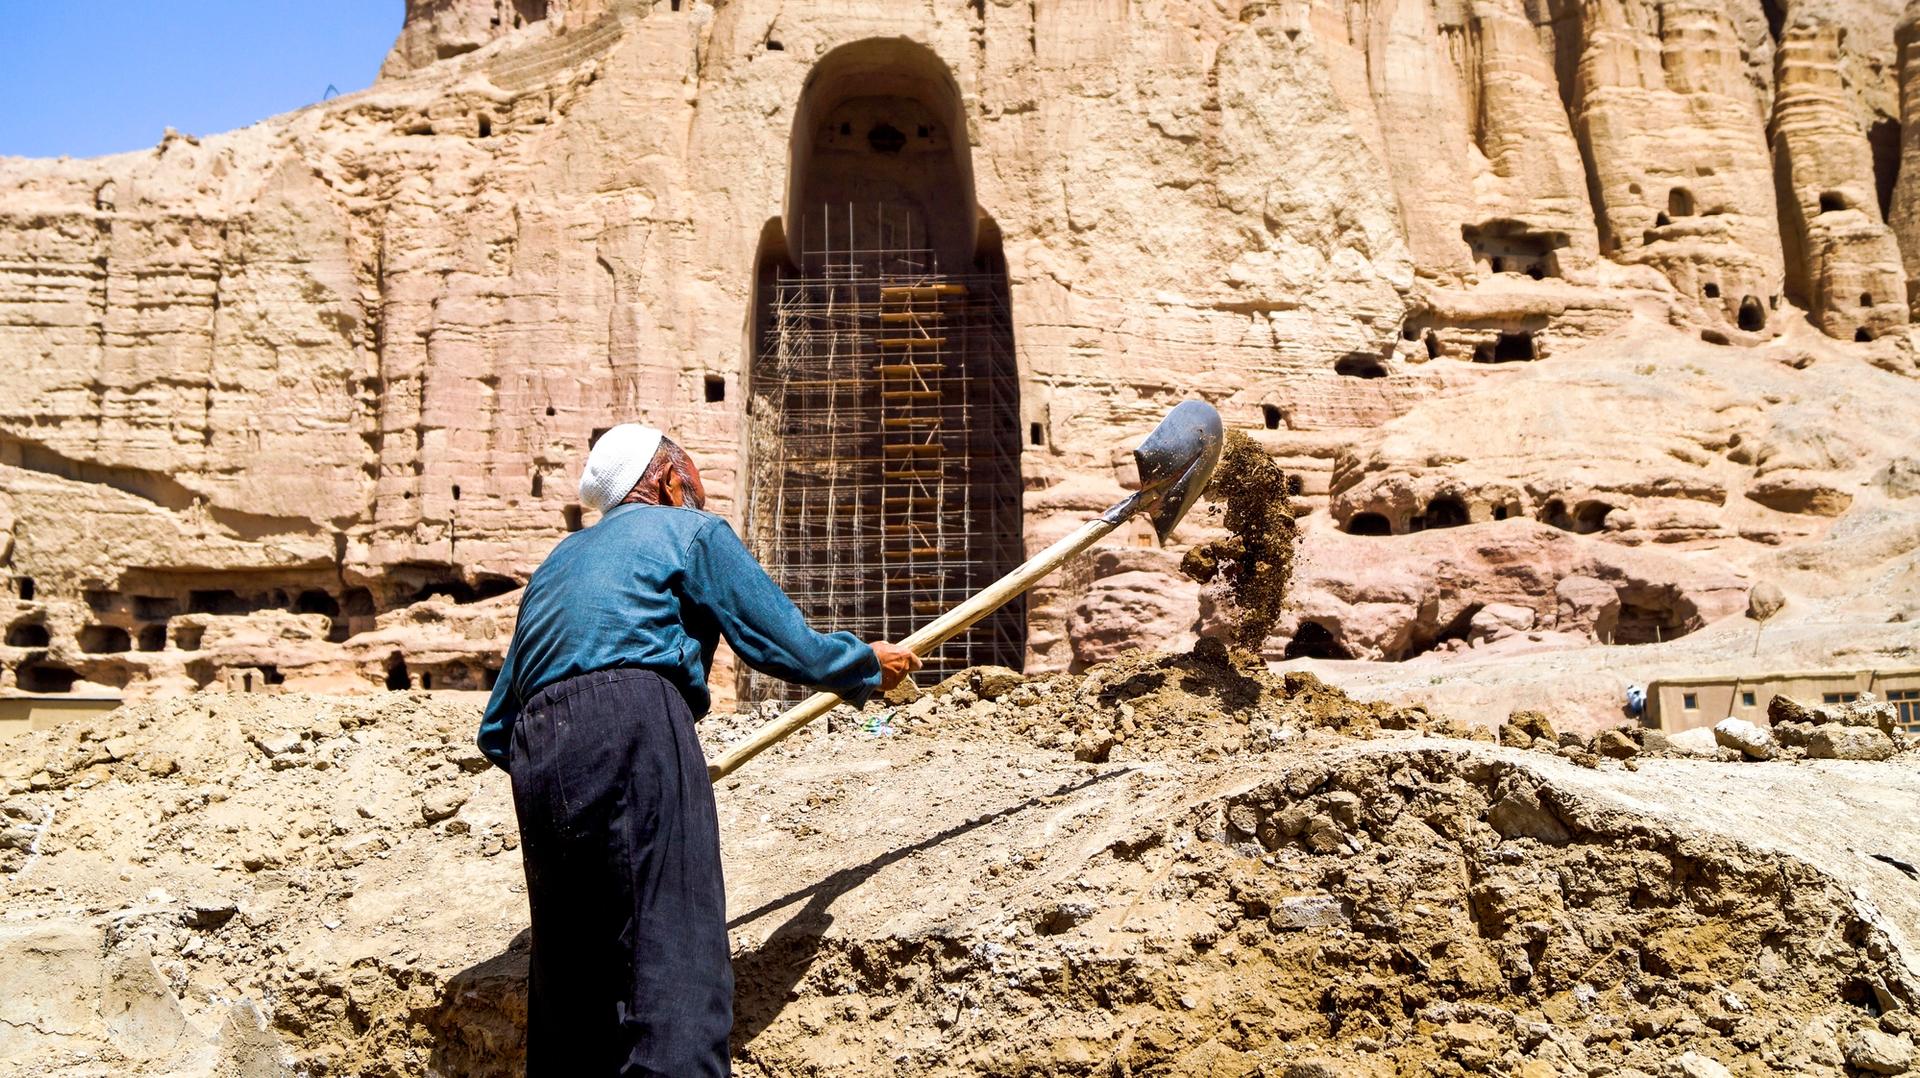 A labourer digging grounds near the Western Buddha niche at the inauguration ceremony on 1 August that announced plans to rebuild an old bazaar in Bamiyan Valley. The works were stopped the next day. © The Art Newspaper